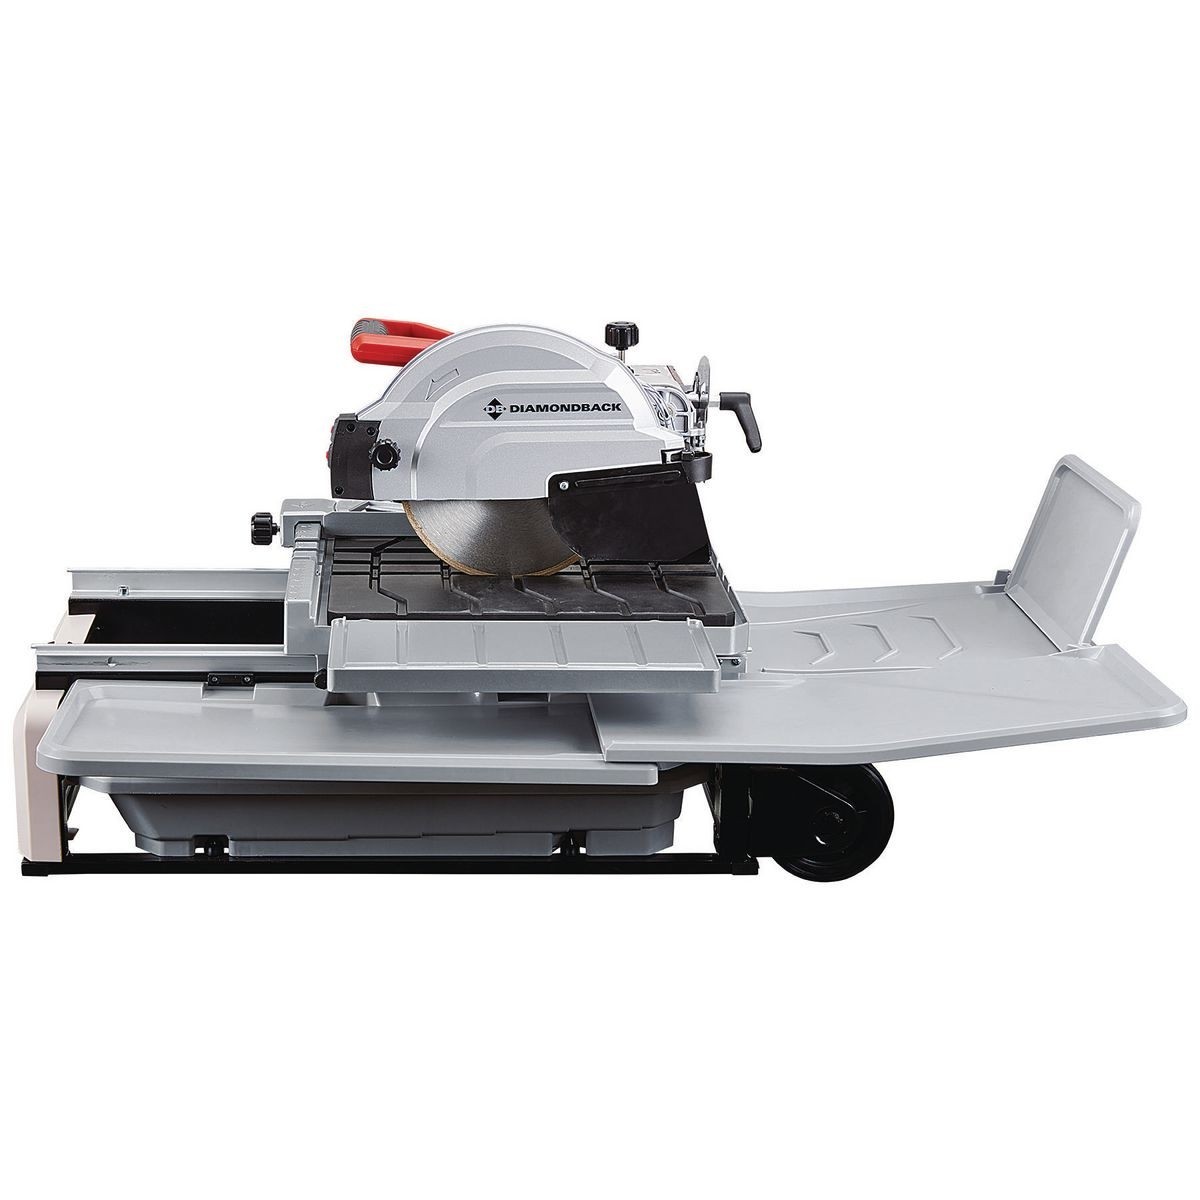 DIAMONDBACK 10 In. 2.4 HP Heavy Duty Wet Tile Saw With Sliding Table